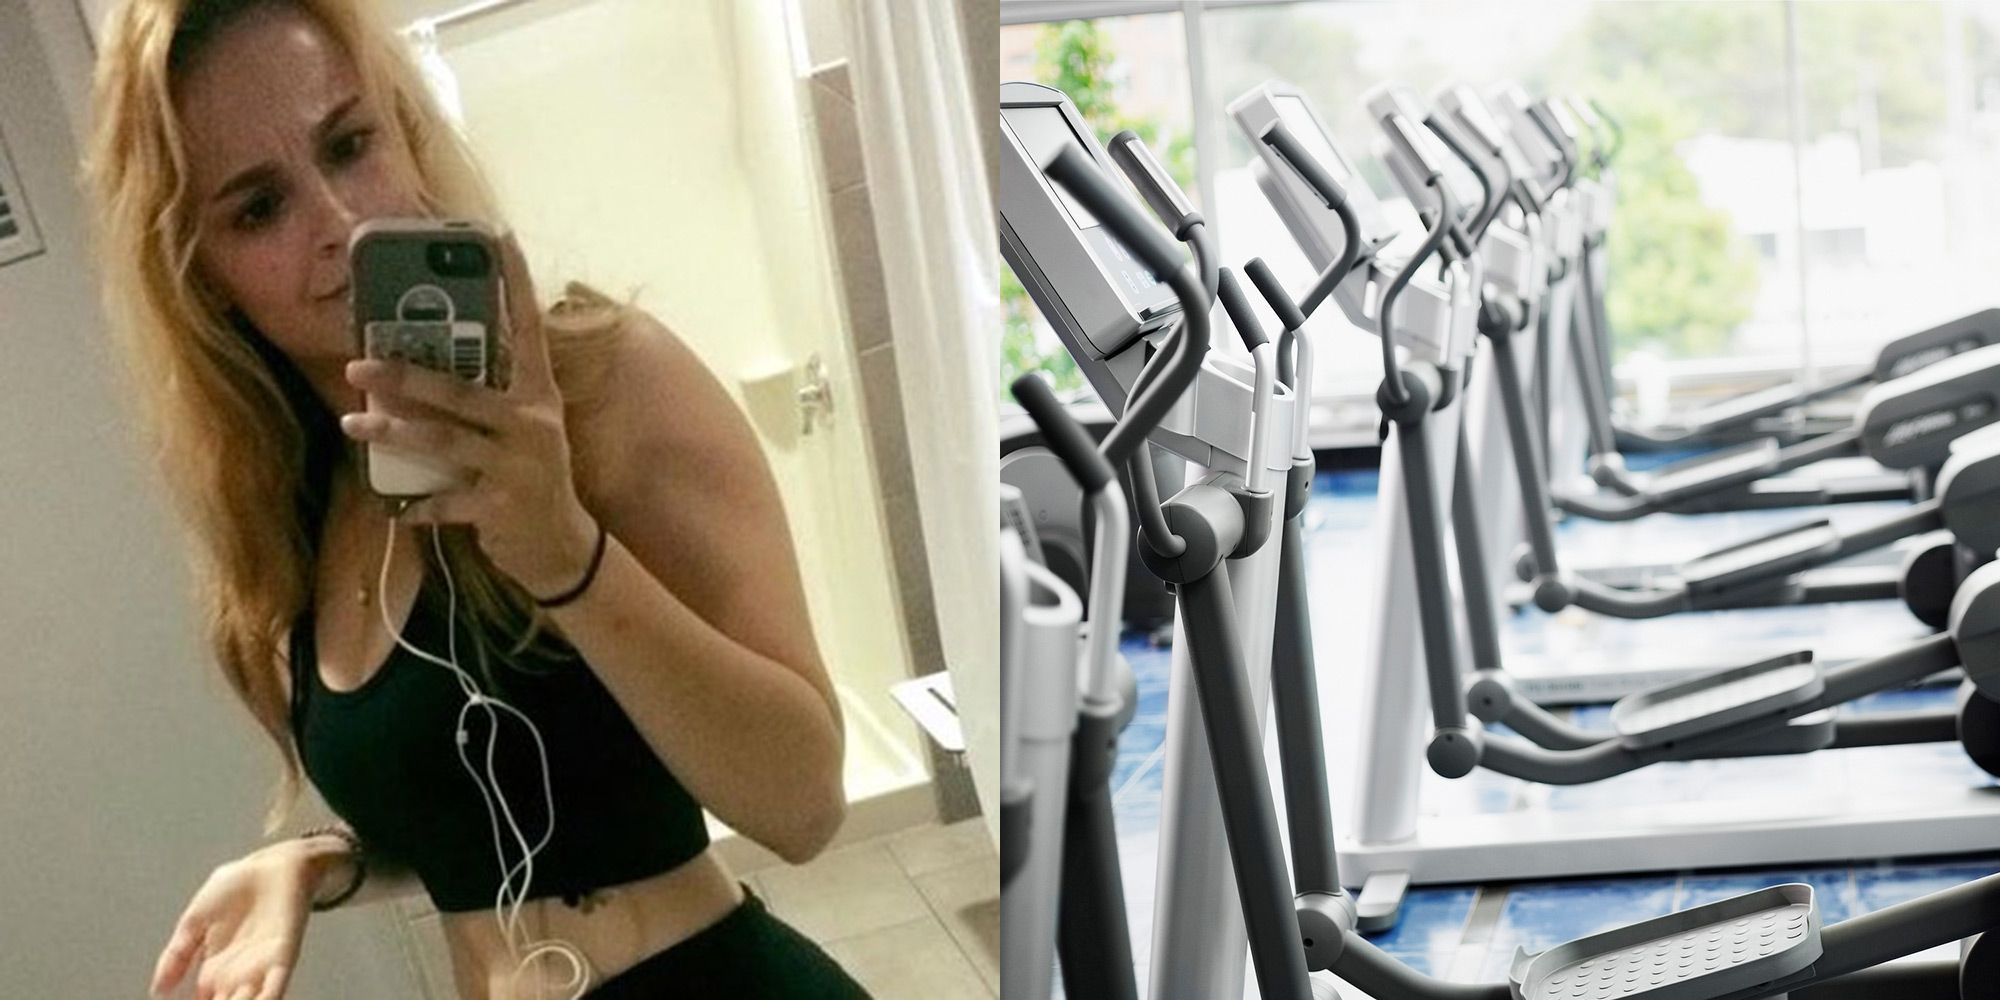 Woman working out in a sports bra says her gym demanded she put a shirt on  or leave